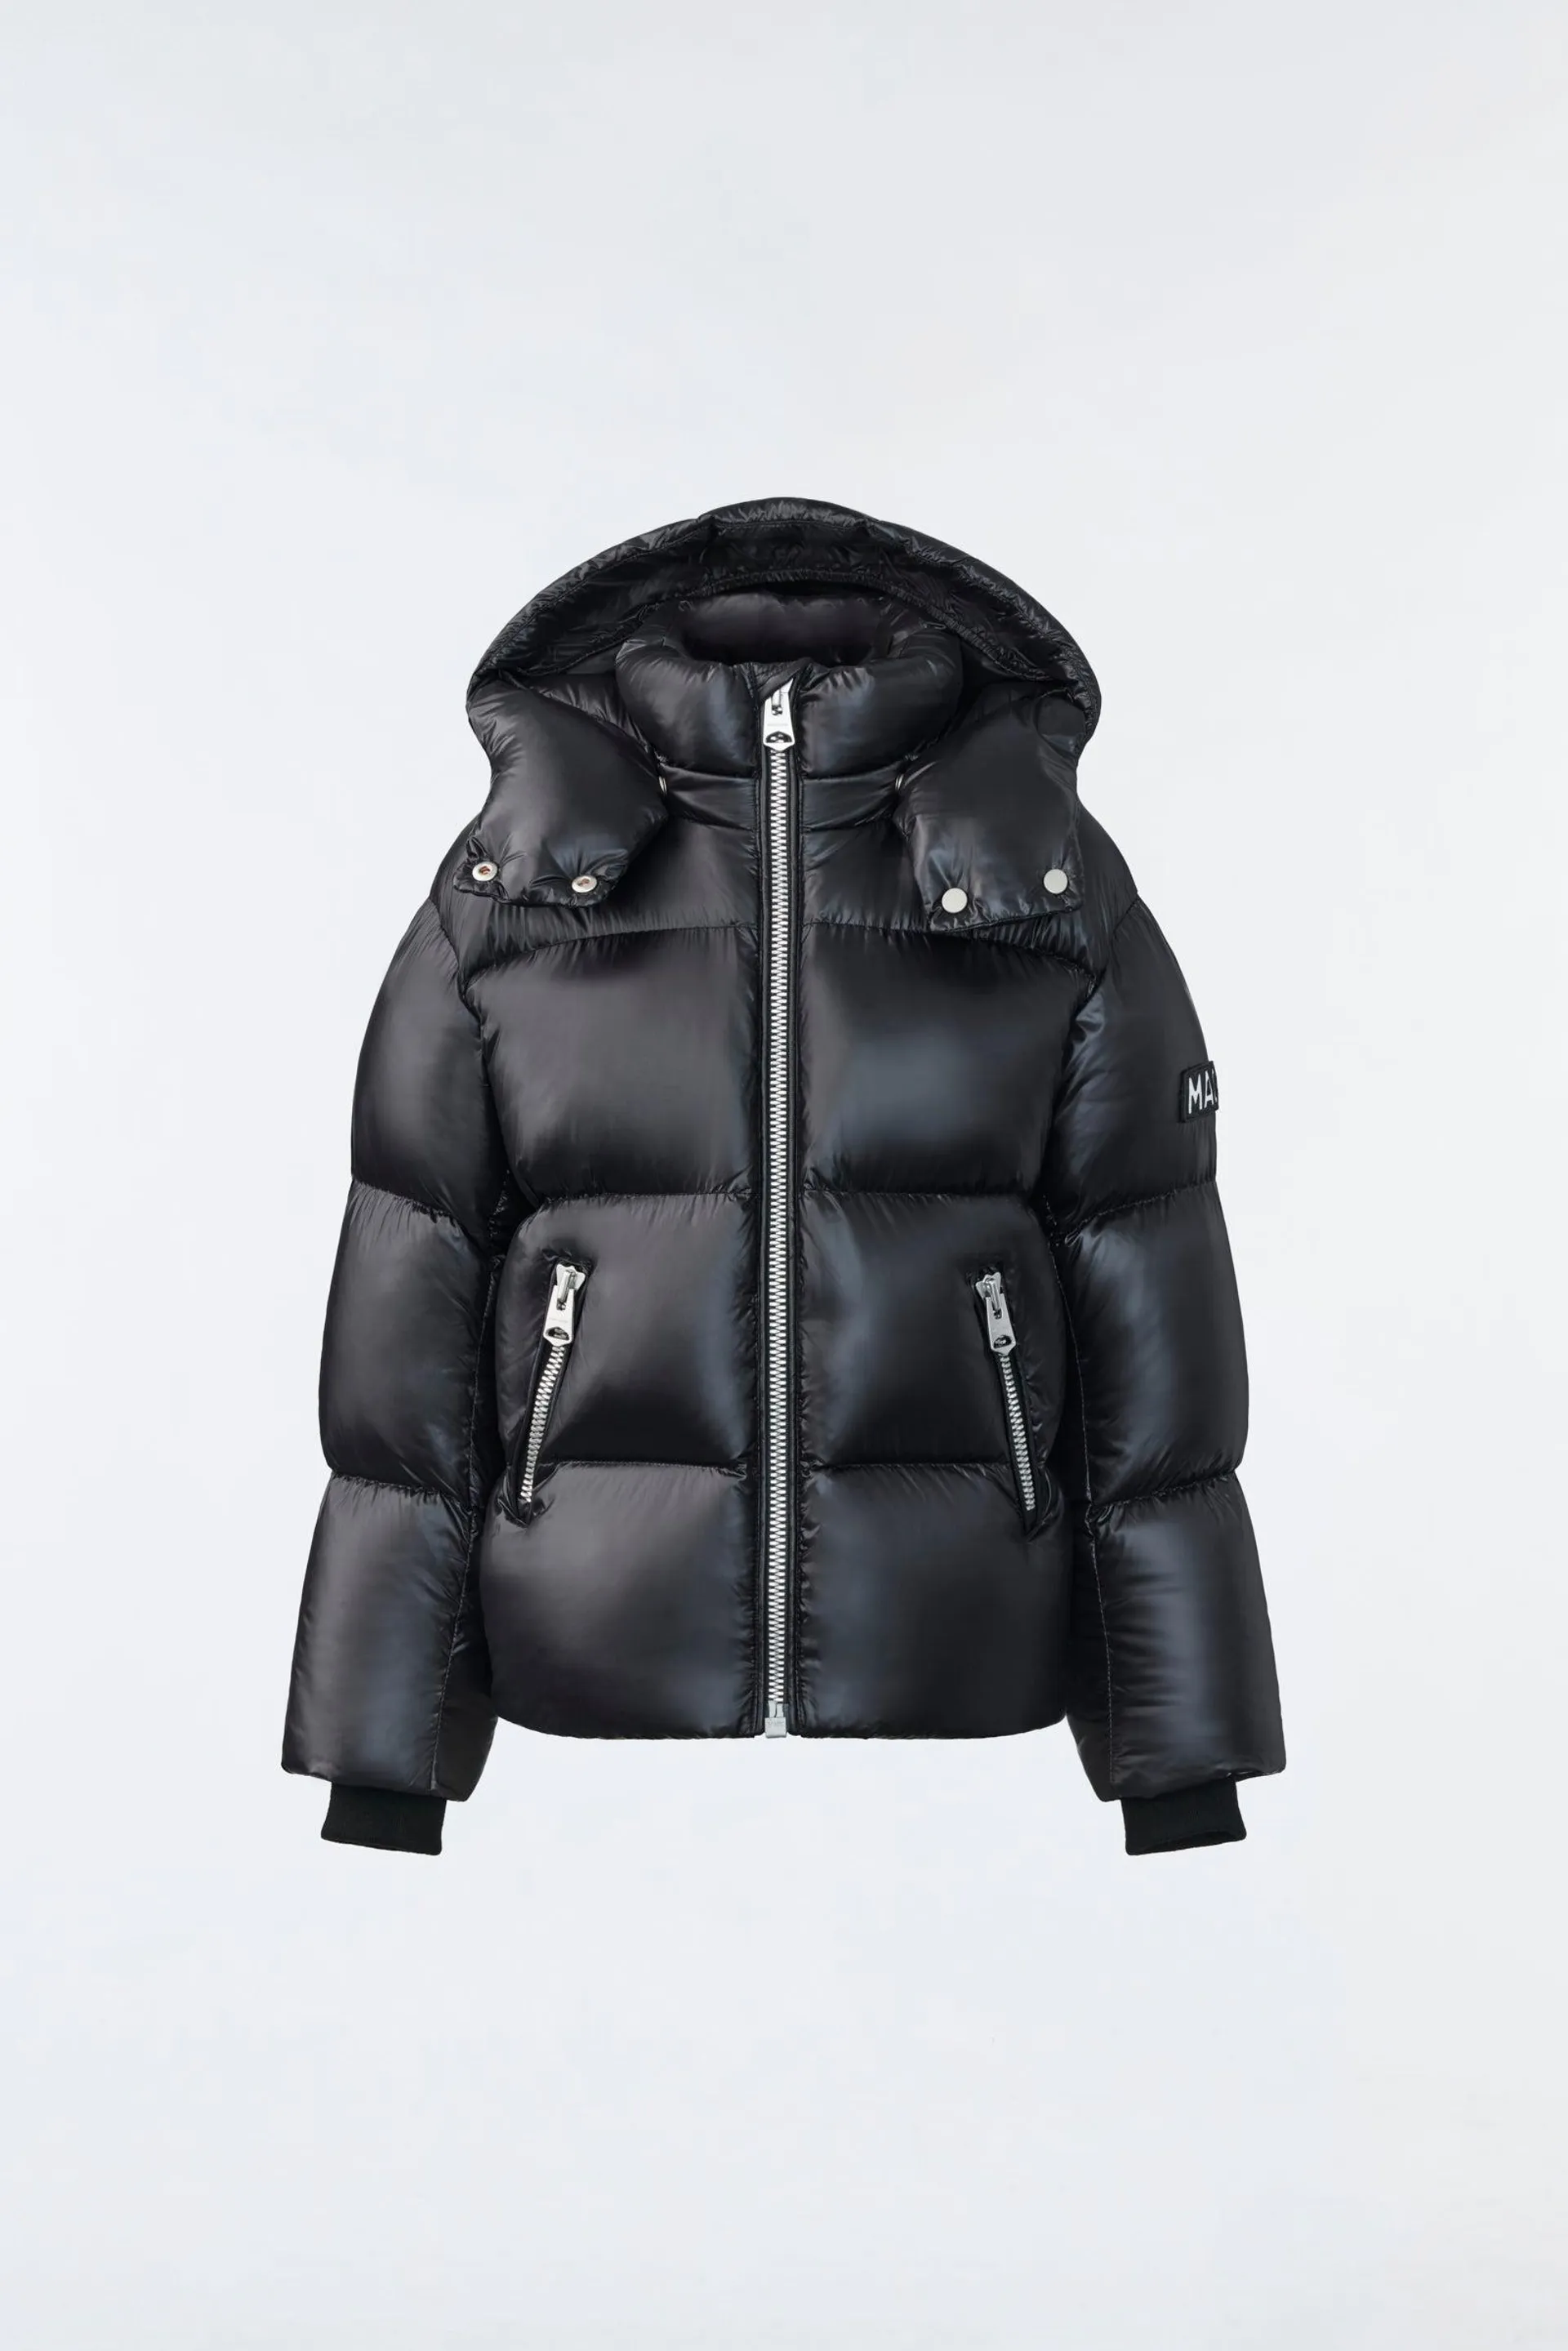 JESSE Lustrous light down jacket for kids (8-14 years)